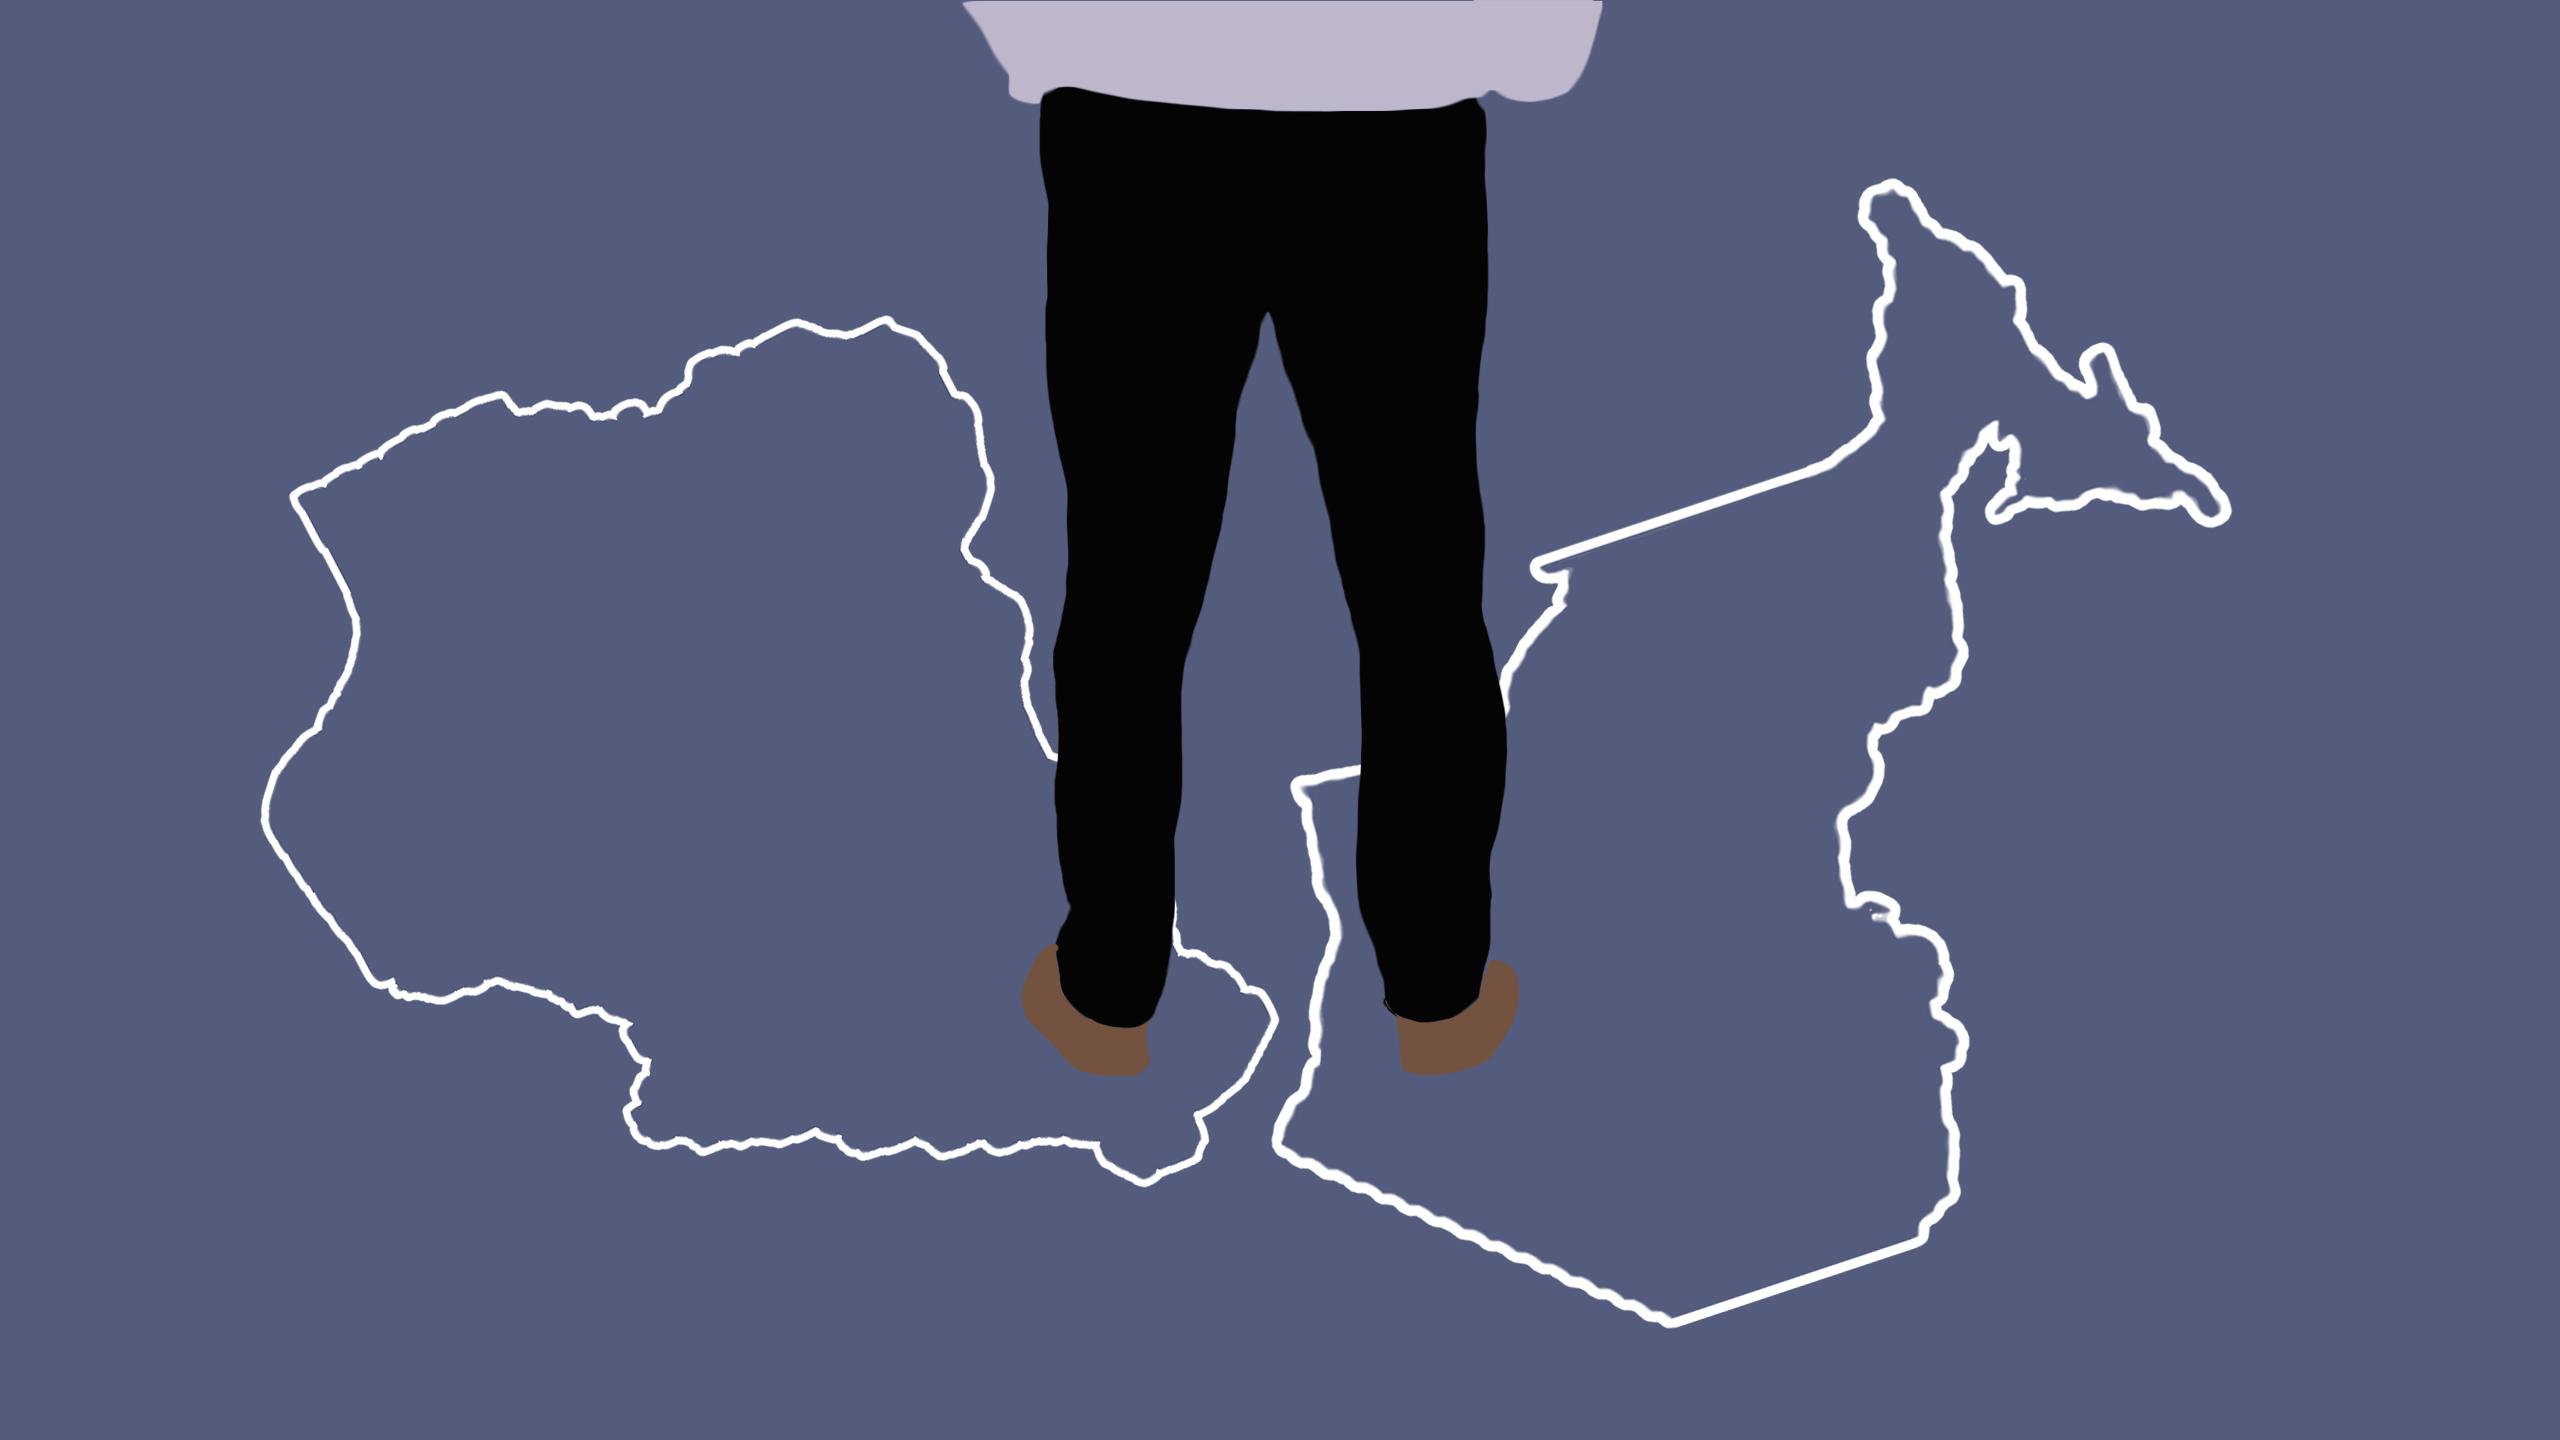 An illustration of a woman standing with one foot on Nigeria and one foot on Ontario